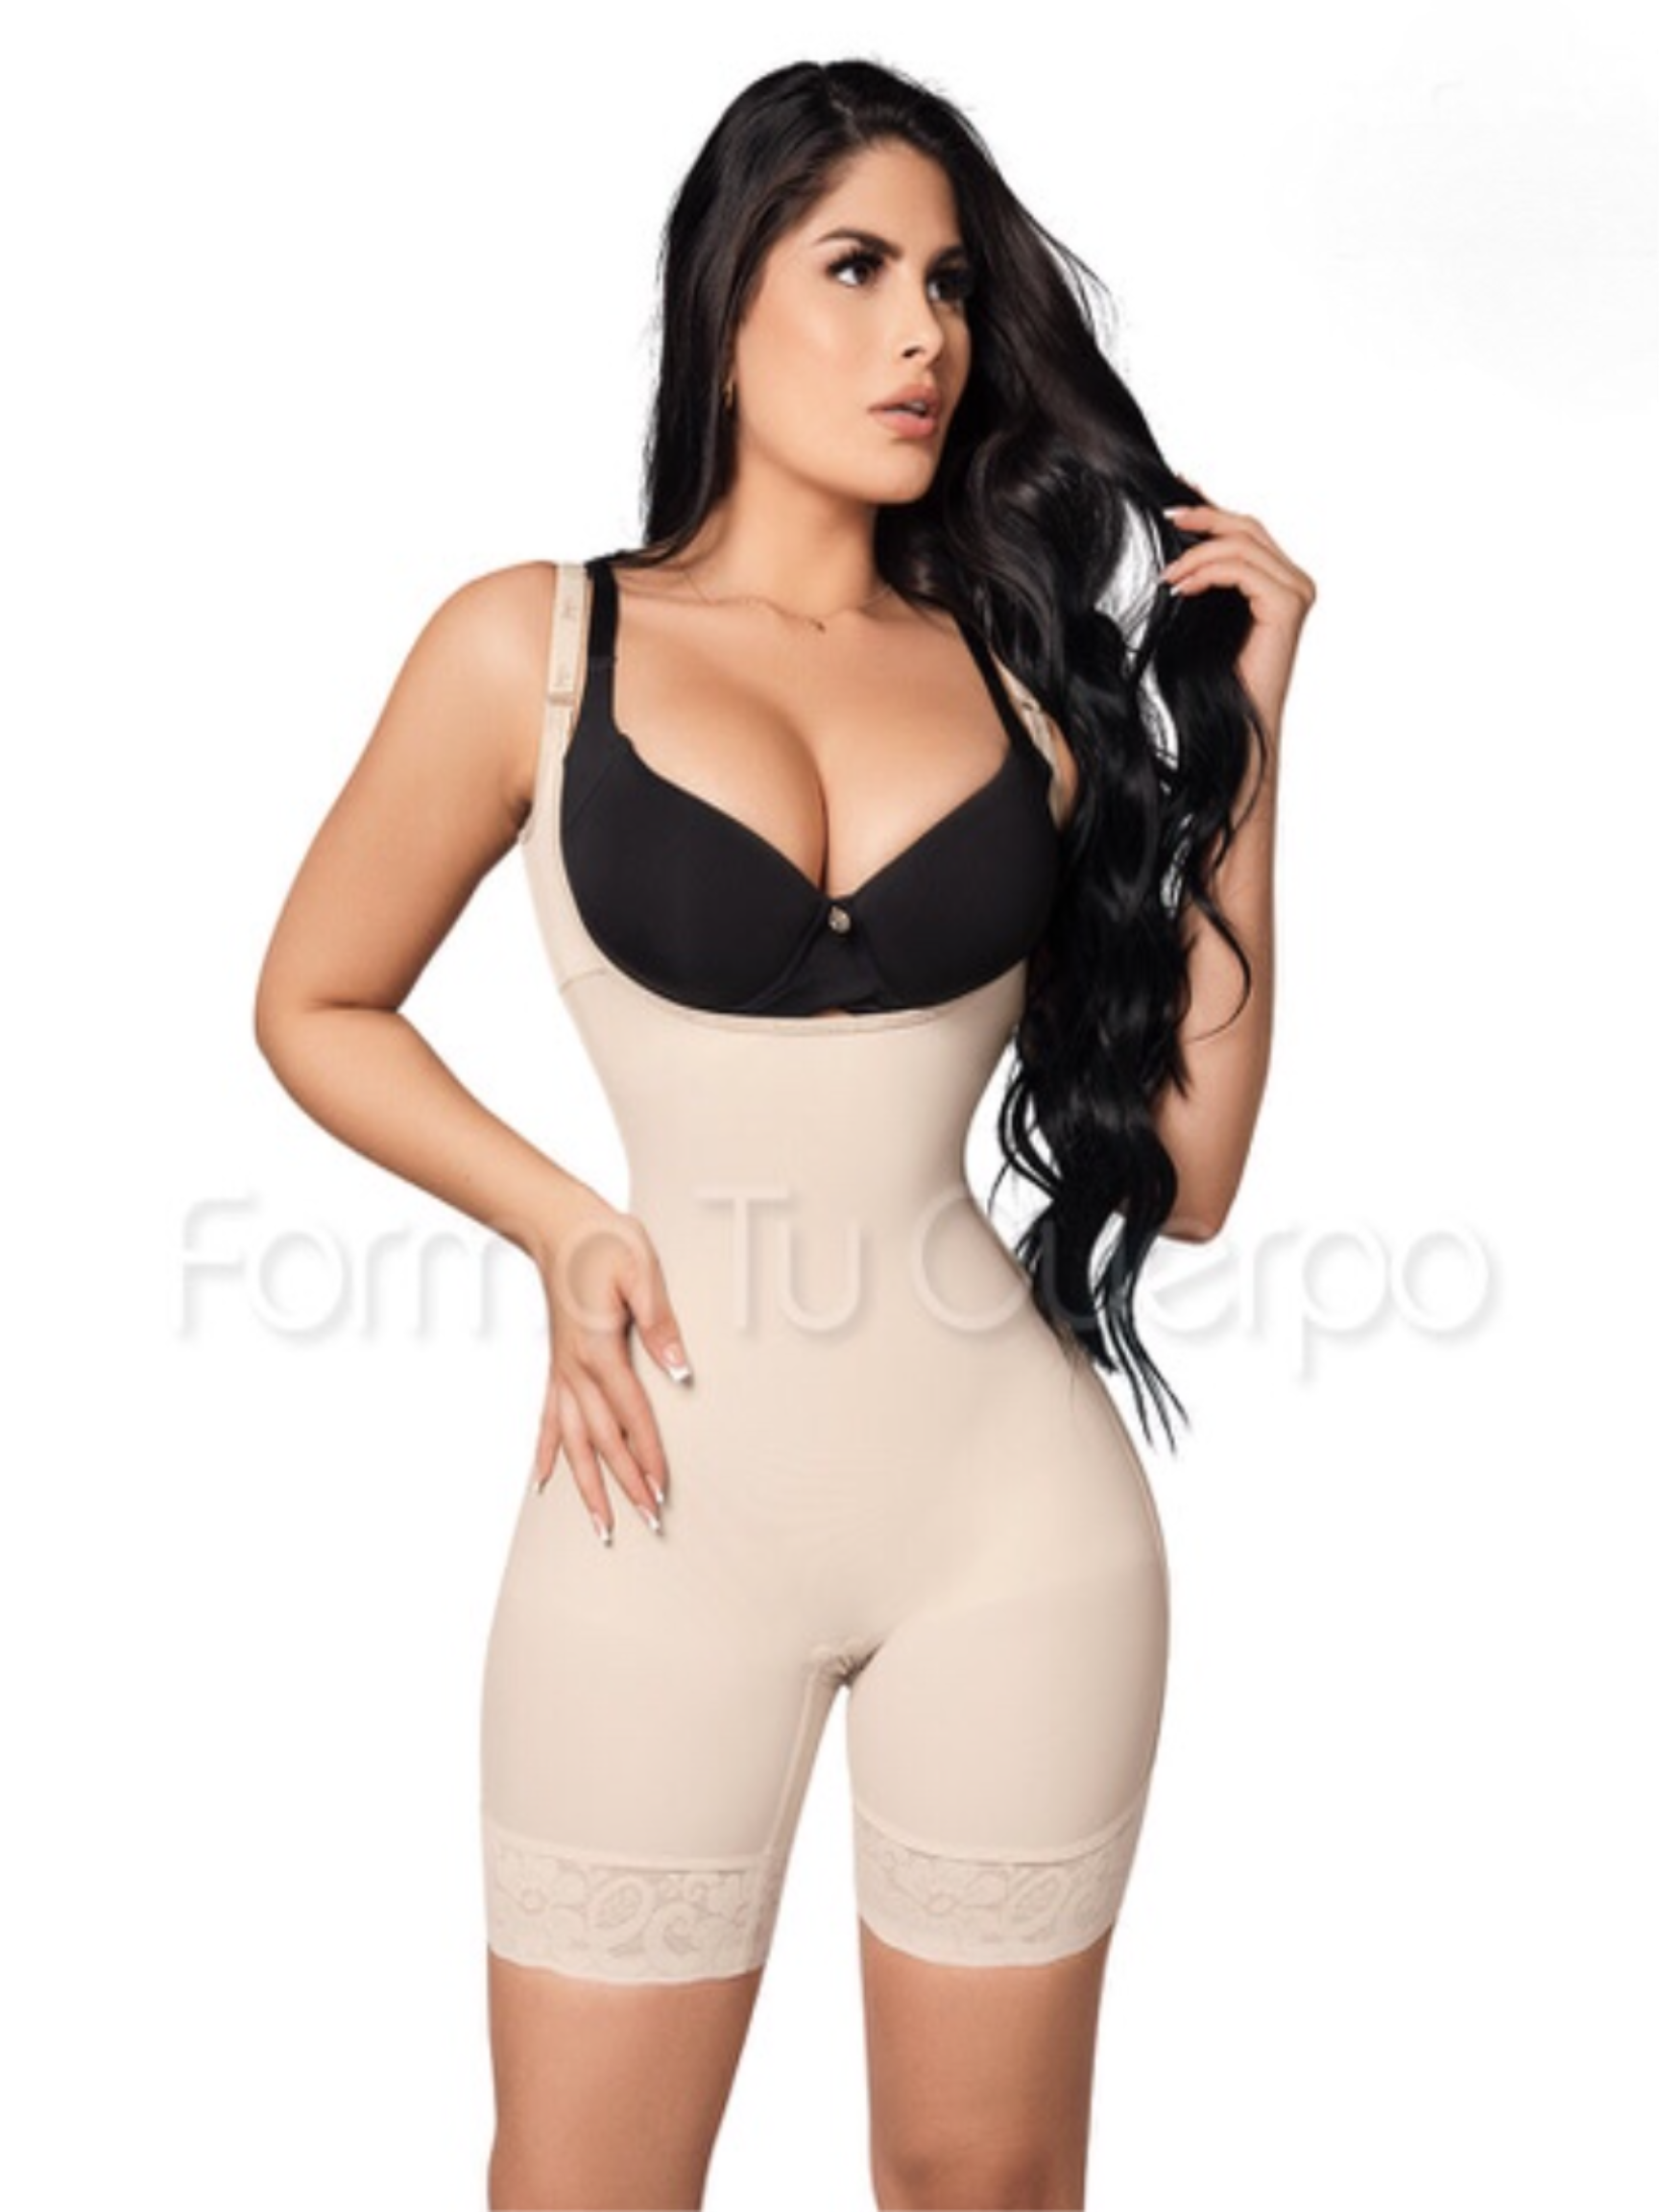 Body Shaper Price Starting From Rs 776. Find Verified Sellers in Hyderabad  - JdMart